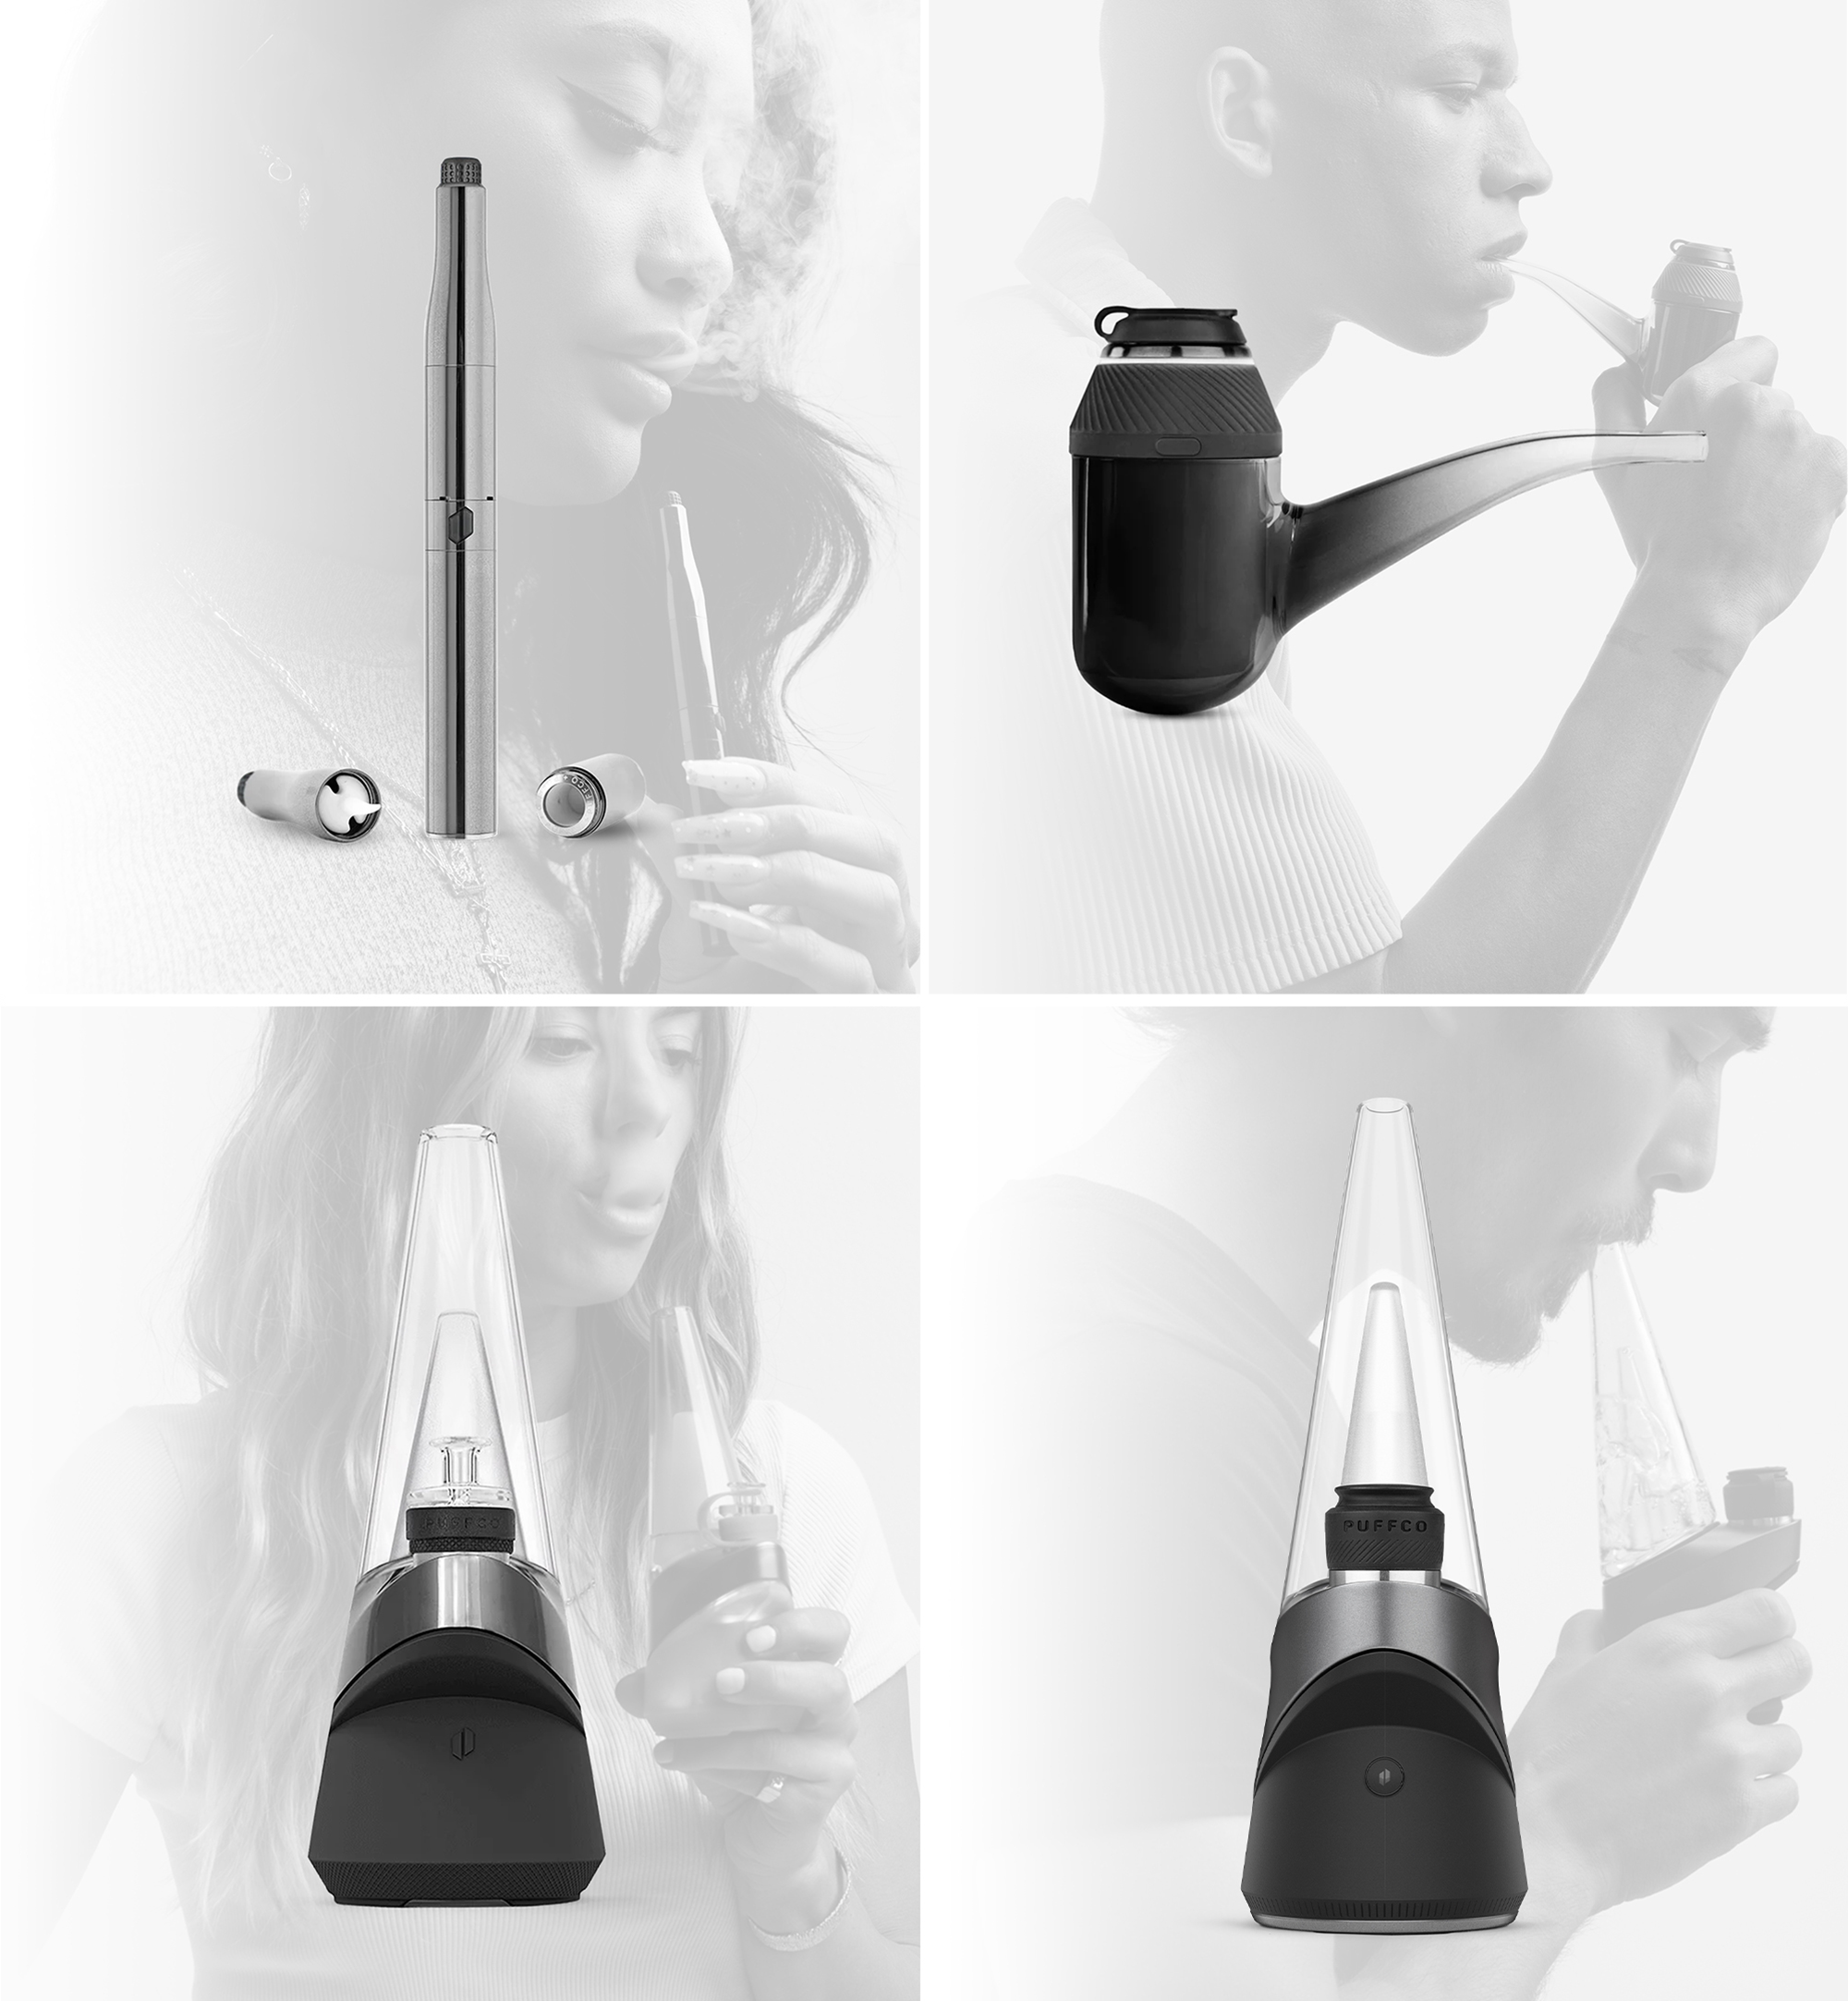 A selection of Puffco vaporizers